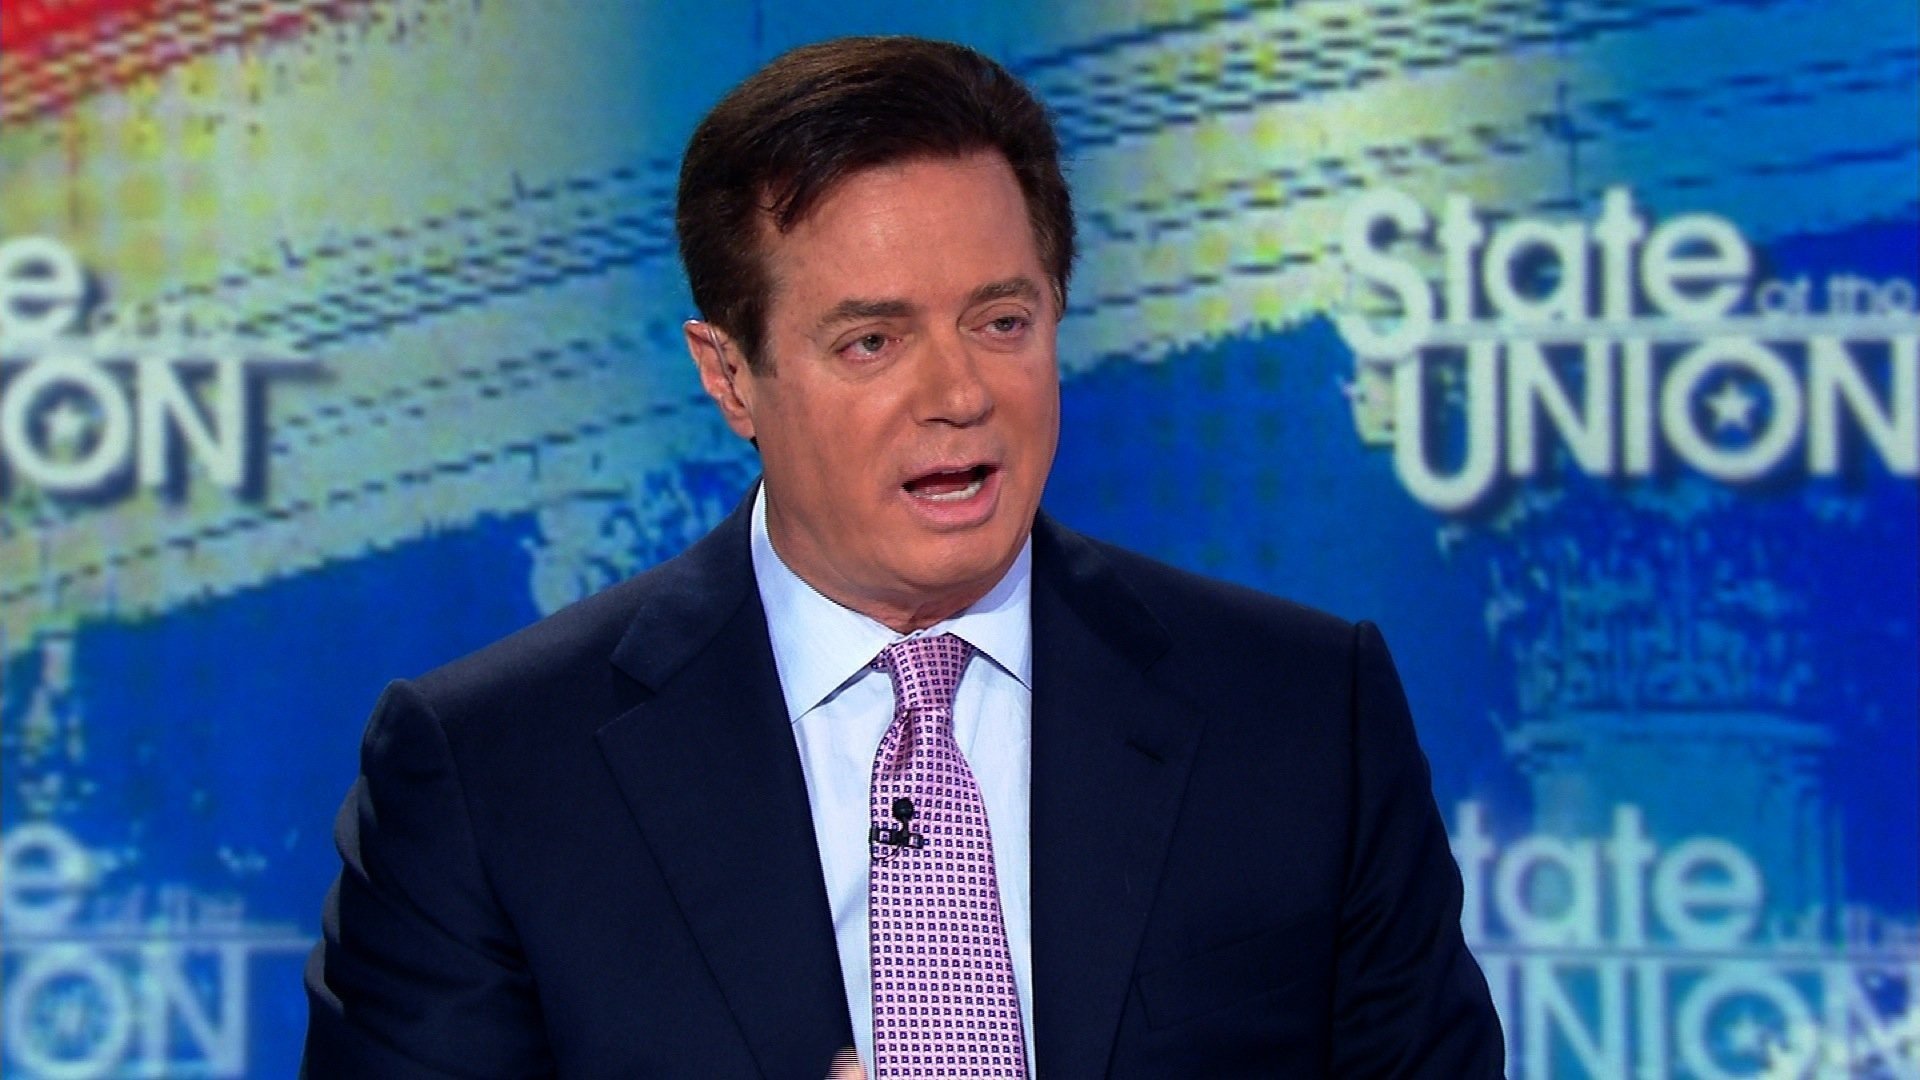 Paul Manafort was Trump's campaign chairman for the 2016 presidential election. Manafort is seen here speaking to CNN in 2016